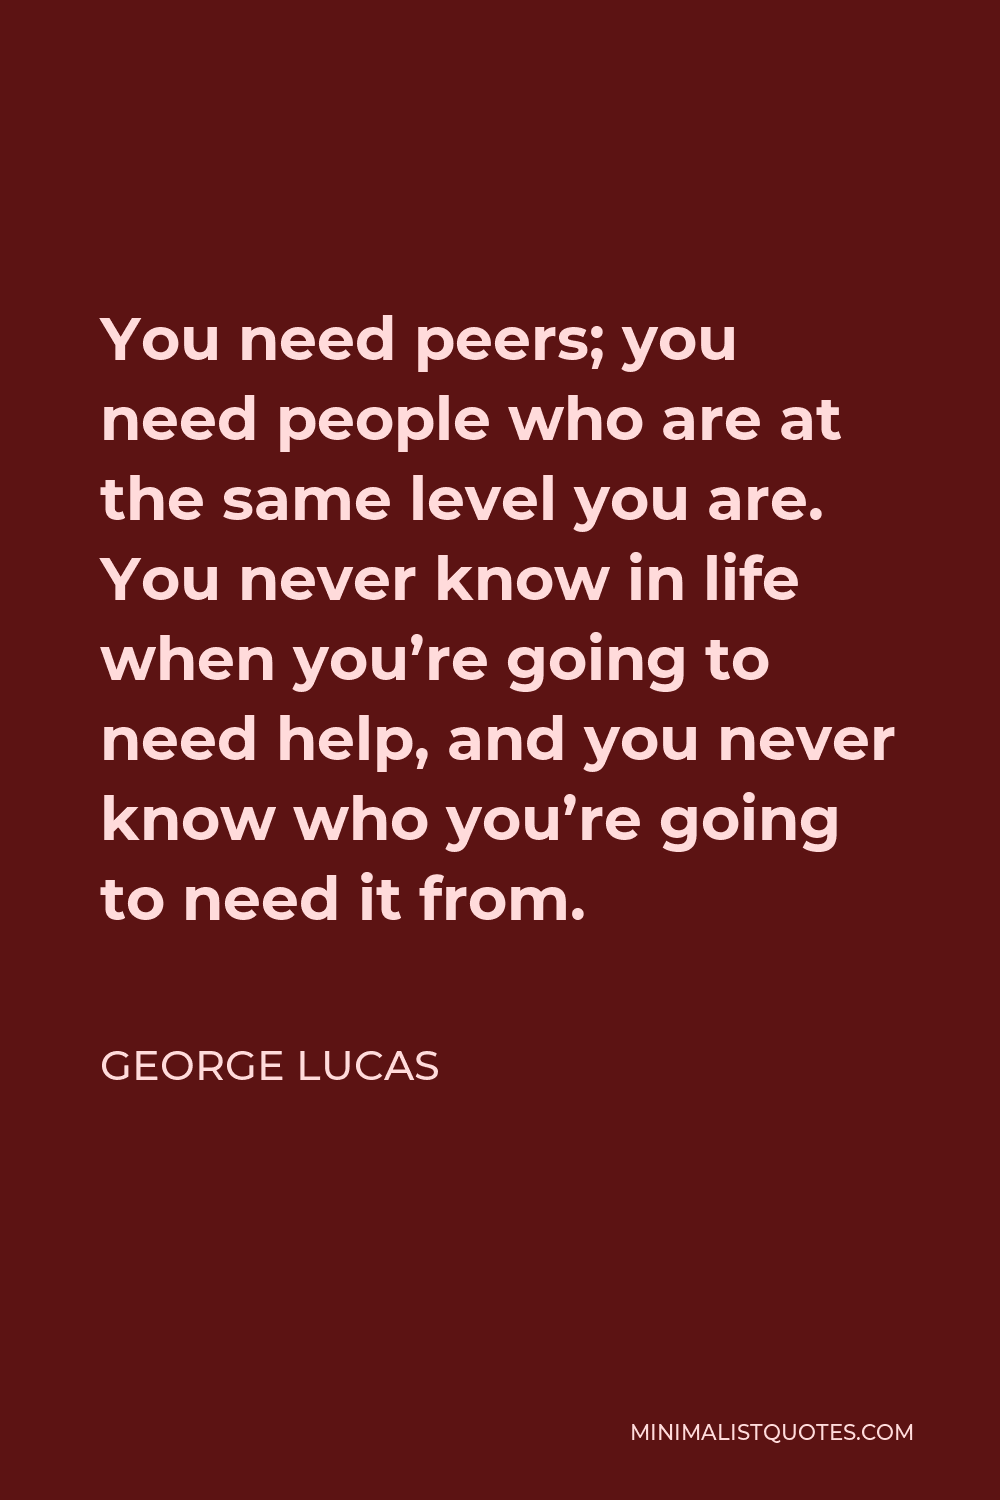 George Lucas Quote - You need peers; you need people who are at the same level you are. You never know in life when you’re going to need help, and you never know who you’re going to need it from.